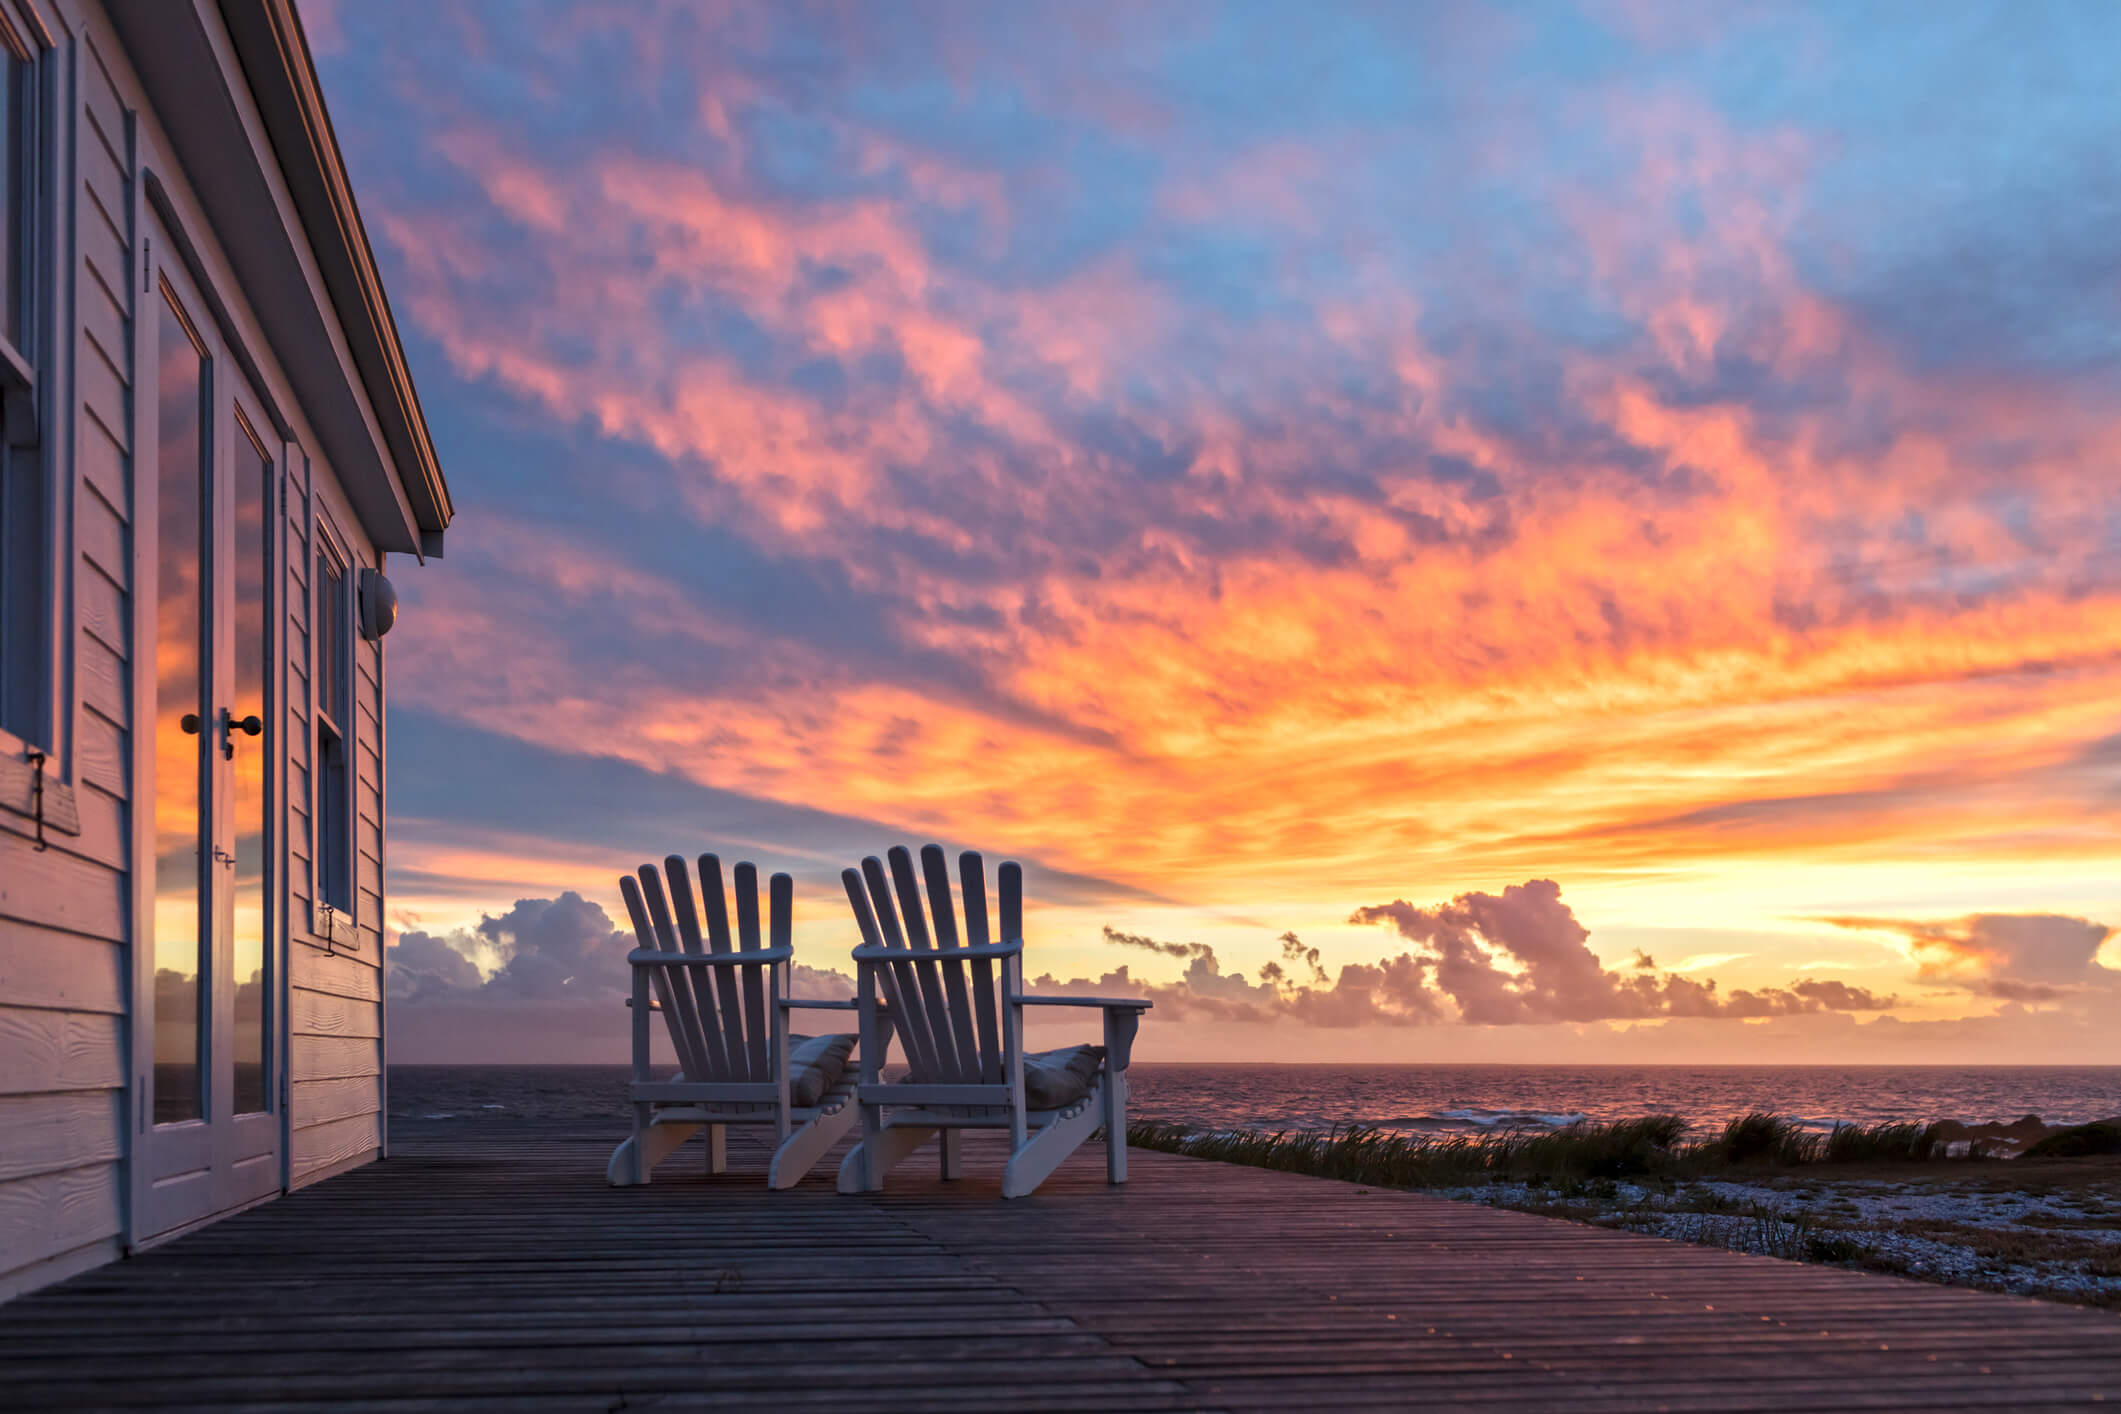 adirondack chairs outside a vacation home at sunset